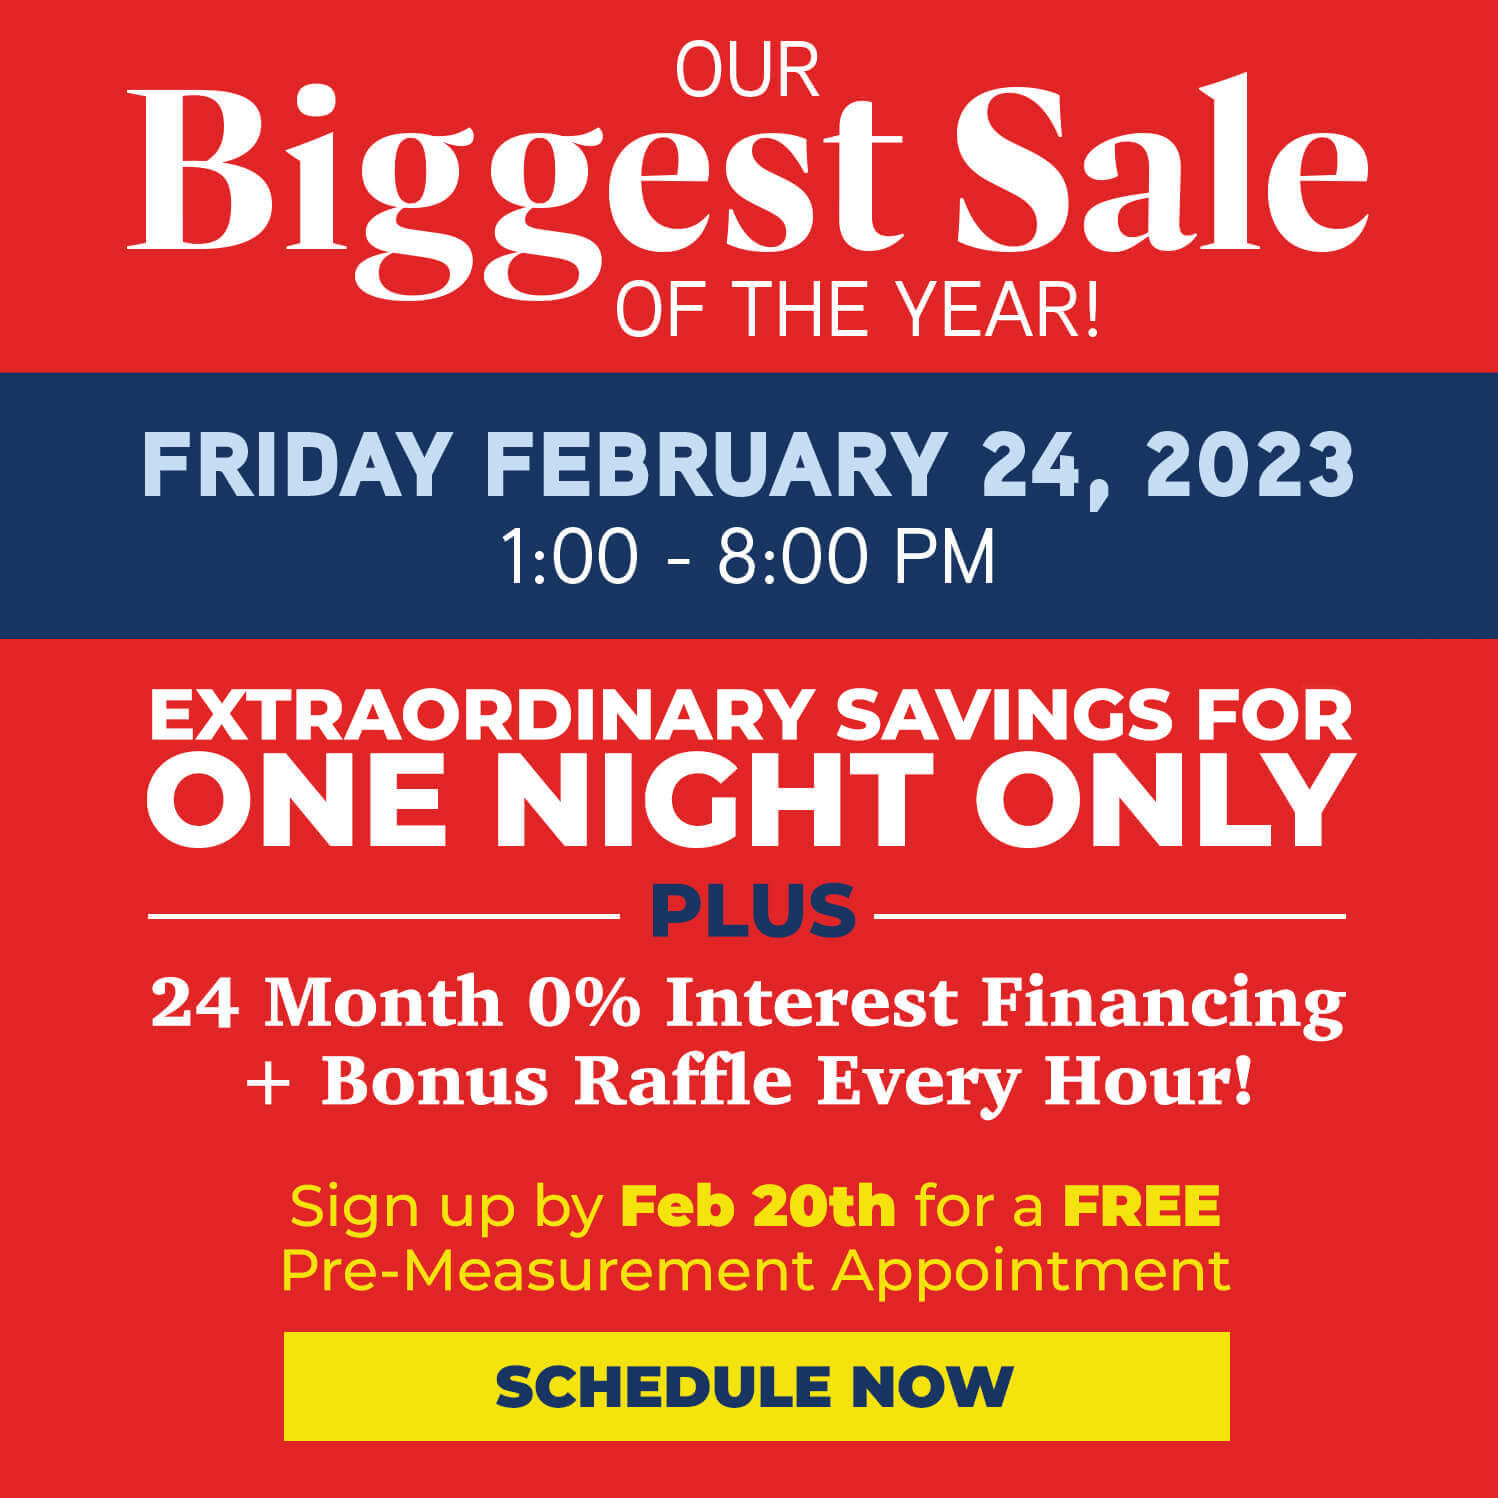 Our Biggest Sale of the Year! Friday Feb 24,2023 from 1- 8pm. Extraordinary savings for one night only plus 24 months 0% interest financing and bonus raffle ever hour! Sign up by 2.20.23 for a FREE Pre-Measurement Appointment. Schedule Now